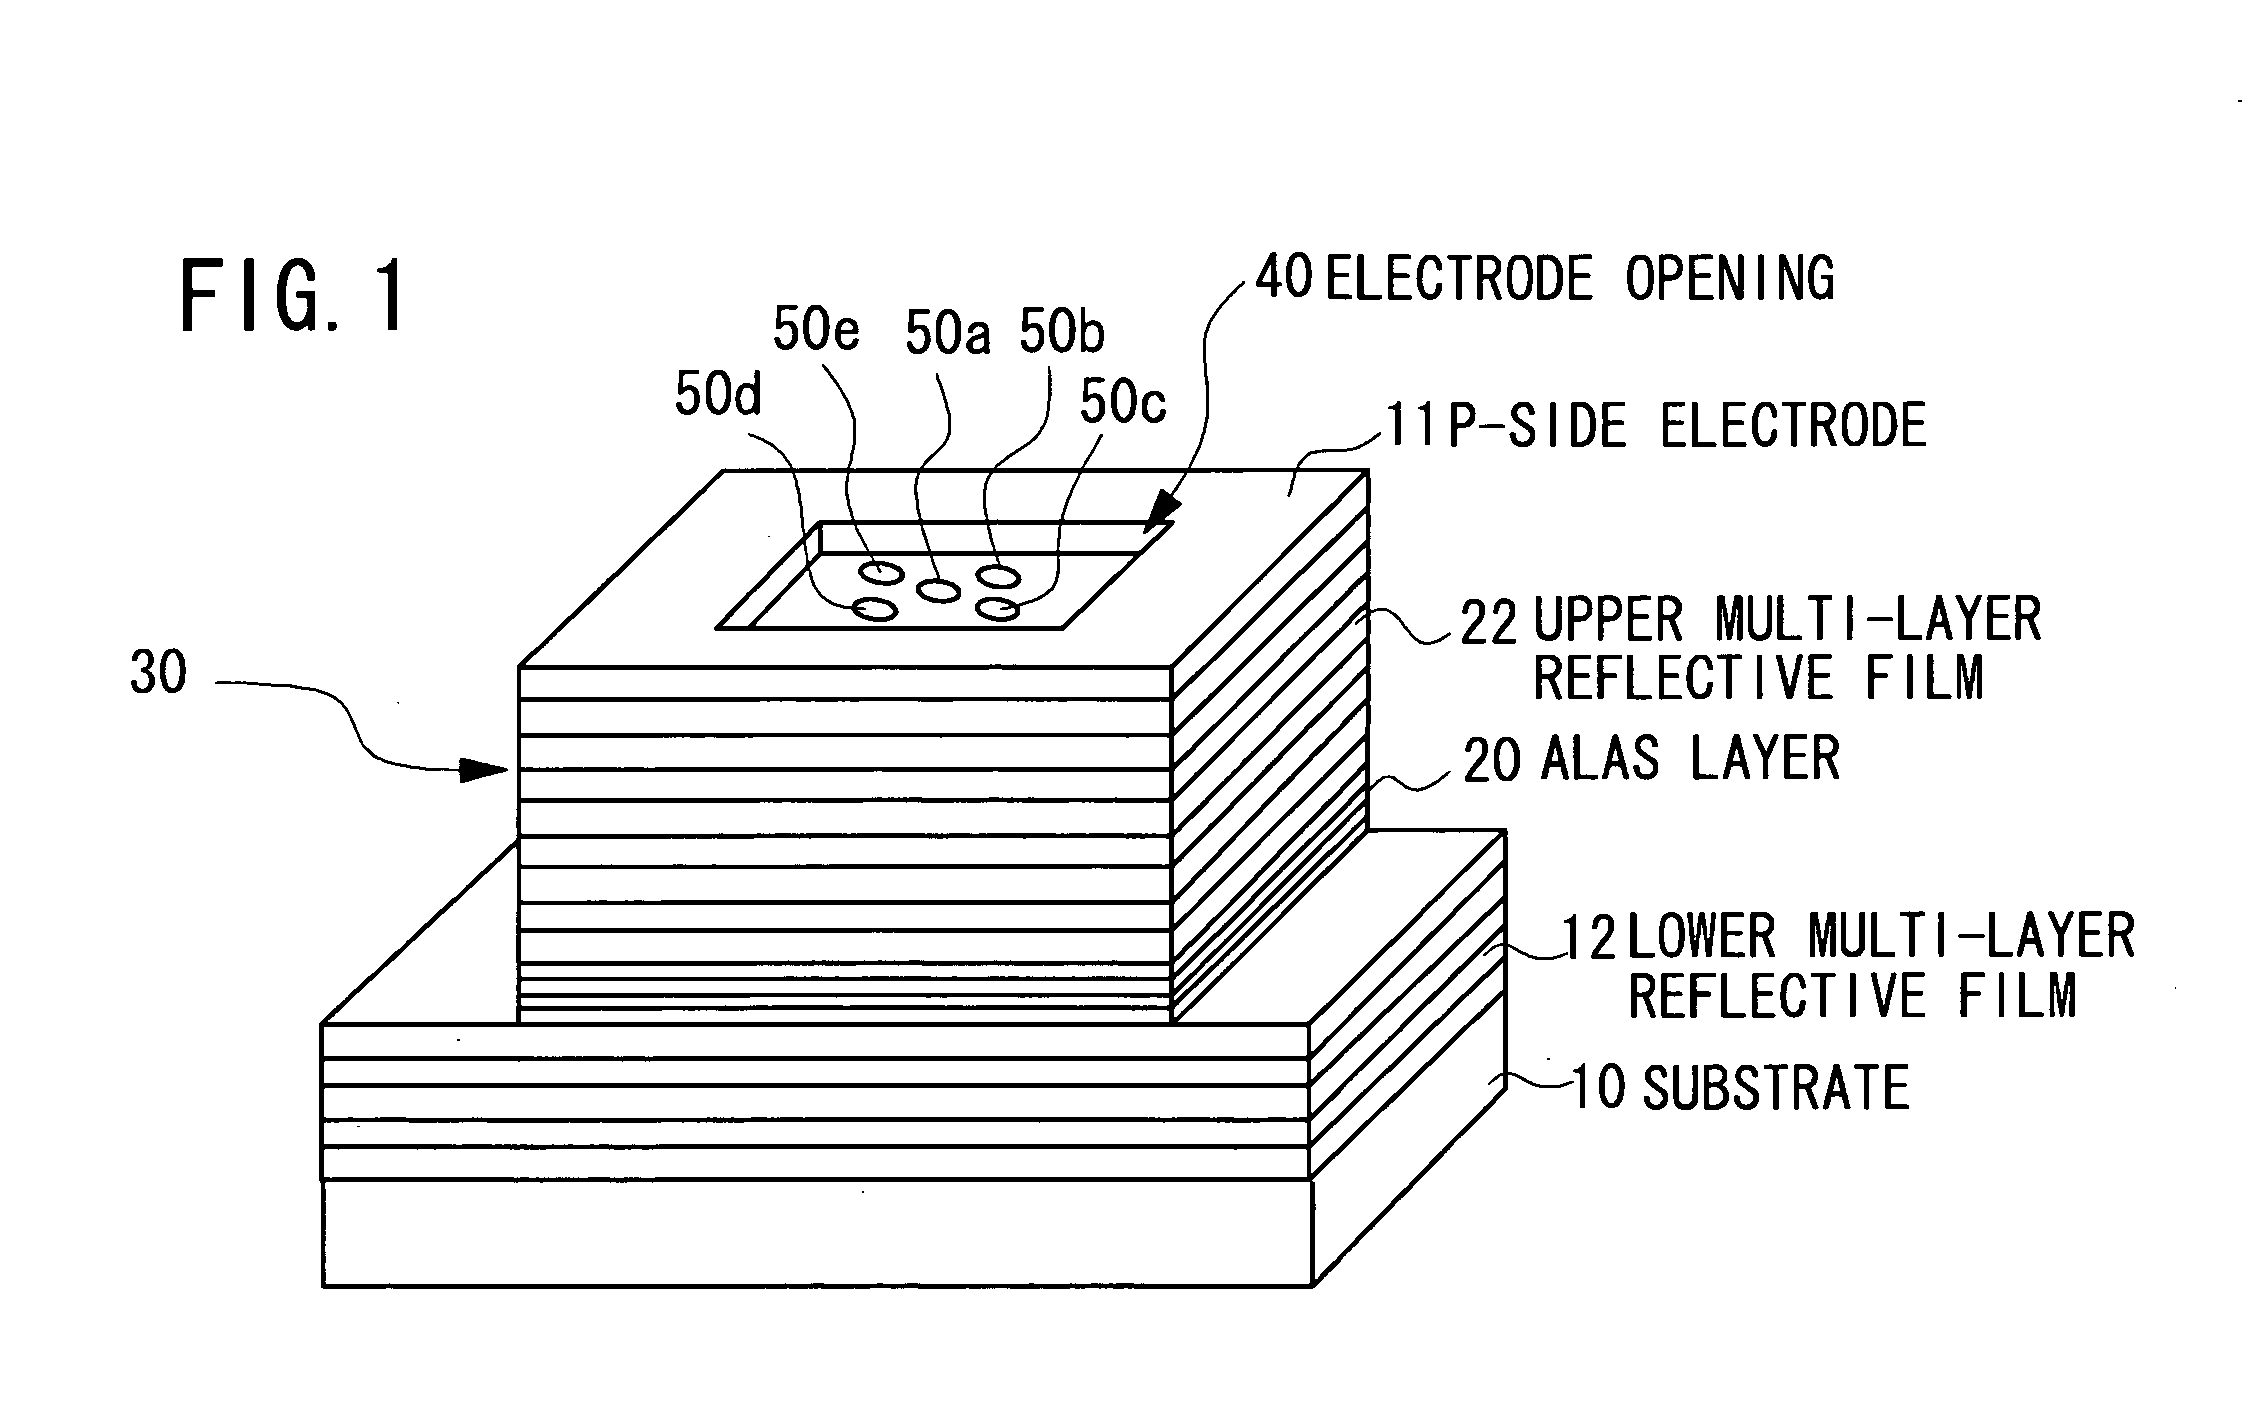 Optical data processing apparatus using vertical-cavity surface-emitting laser (VCSEL) device with large oxide-aperture